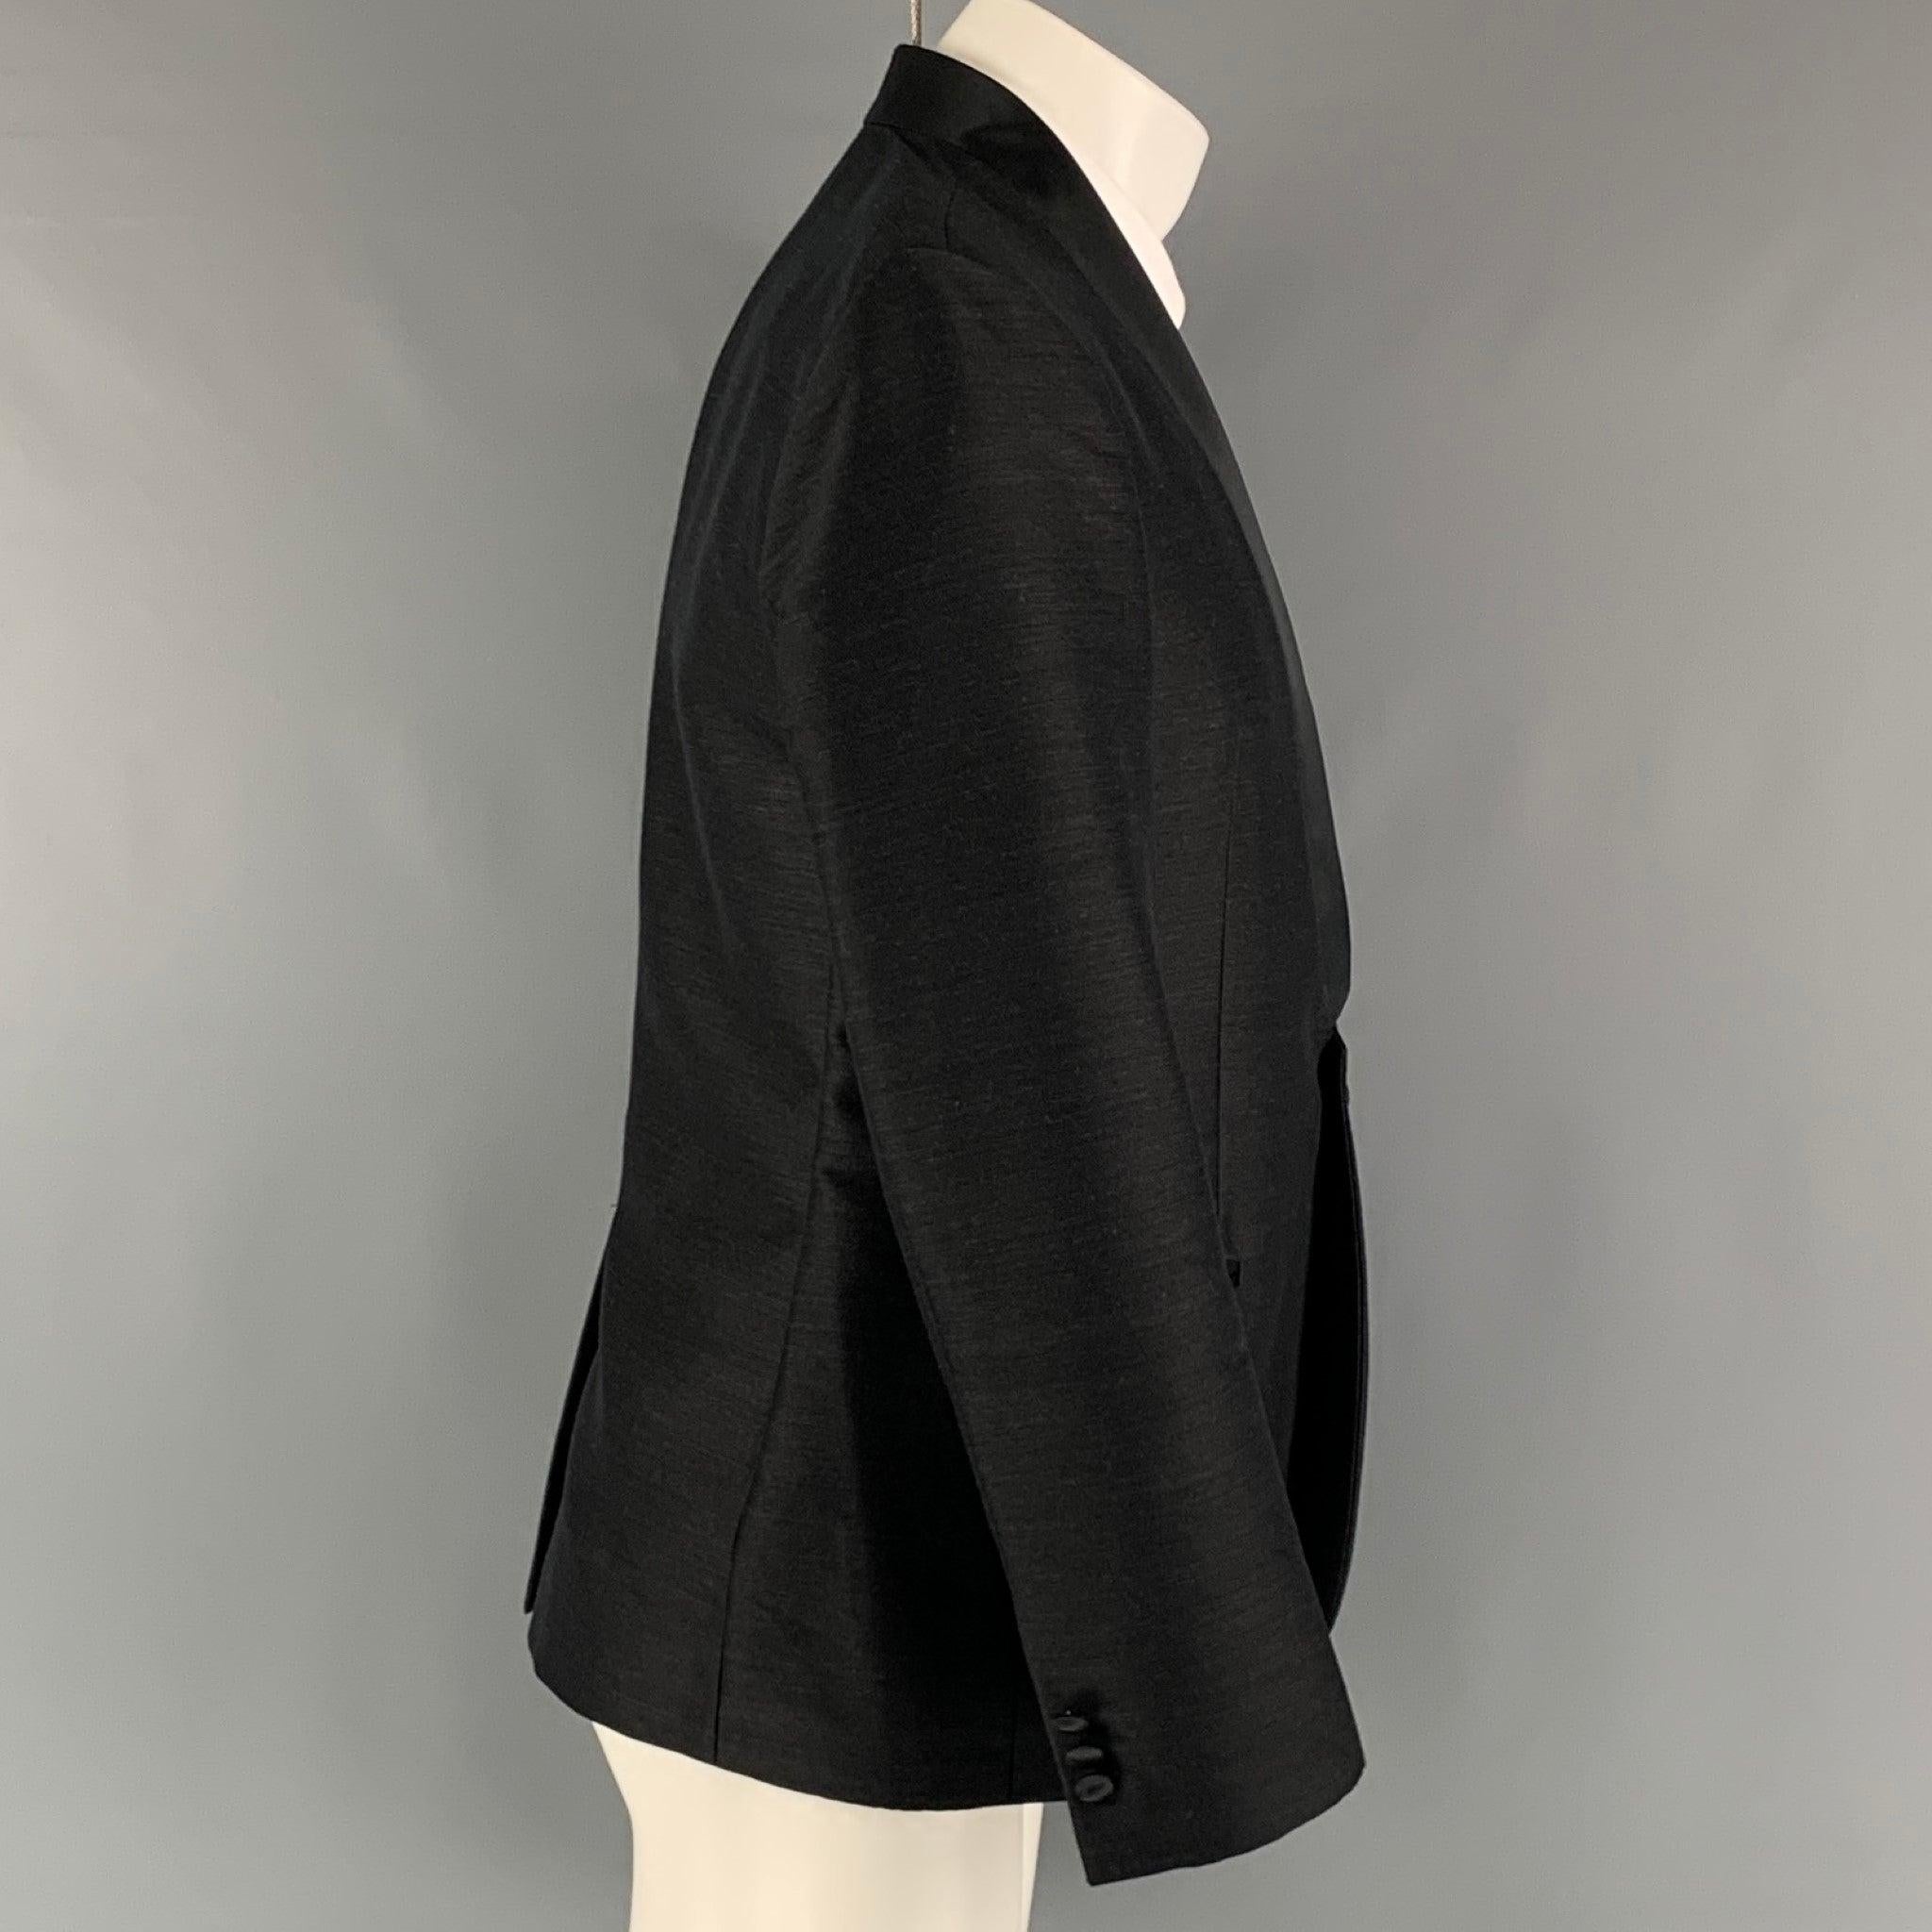 EMPORIO ARMANI 'Matt Line' sport coat comes in a black wool blend woven material full liner featuring a shawl collar, welt pockets, single back vent, and a single button closure. Made in Italy. Excellent Pre-Owned Condition. 

Marked:   50